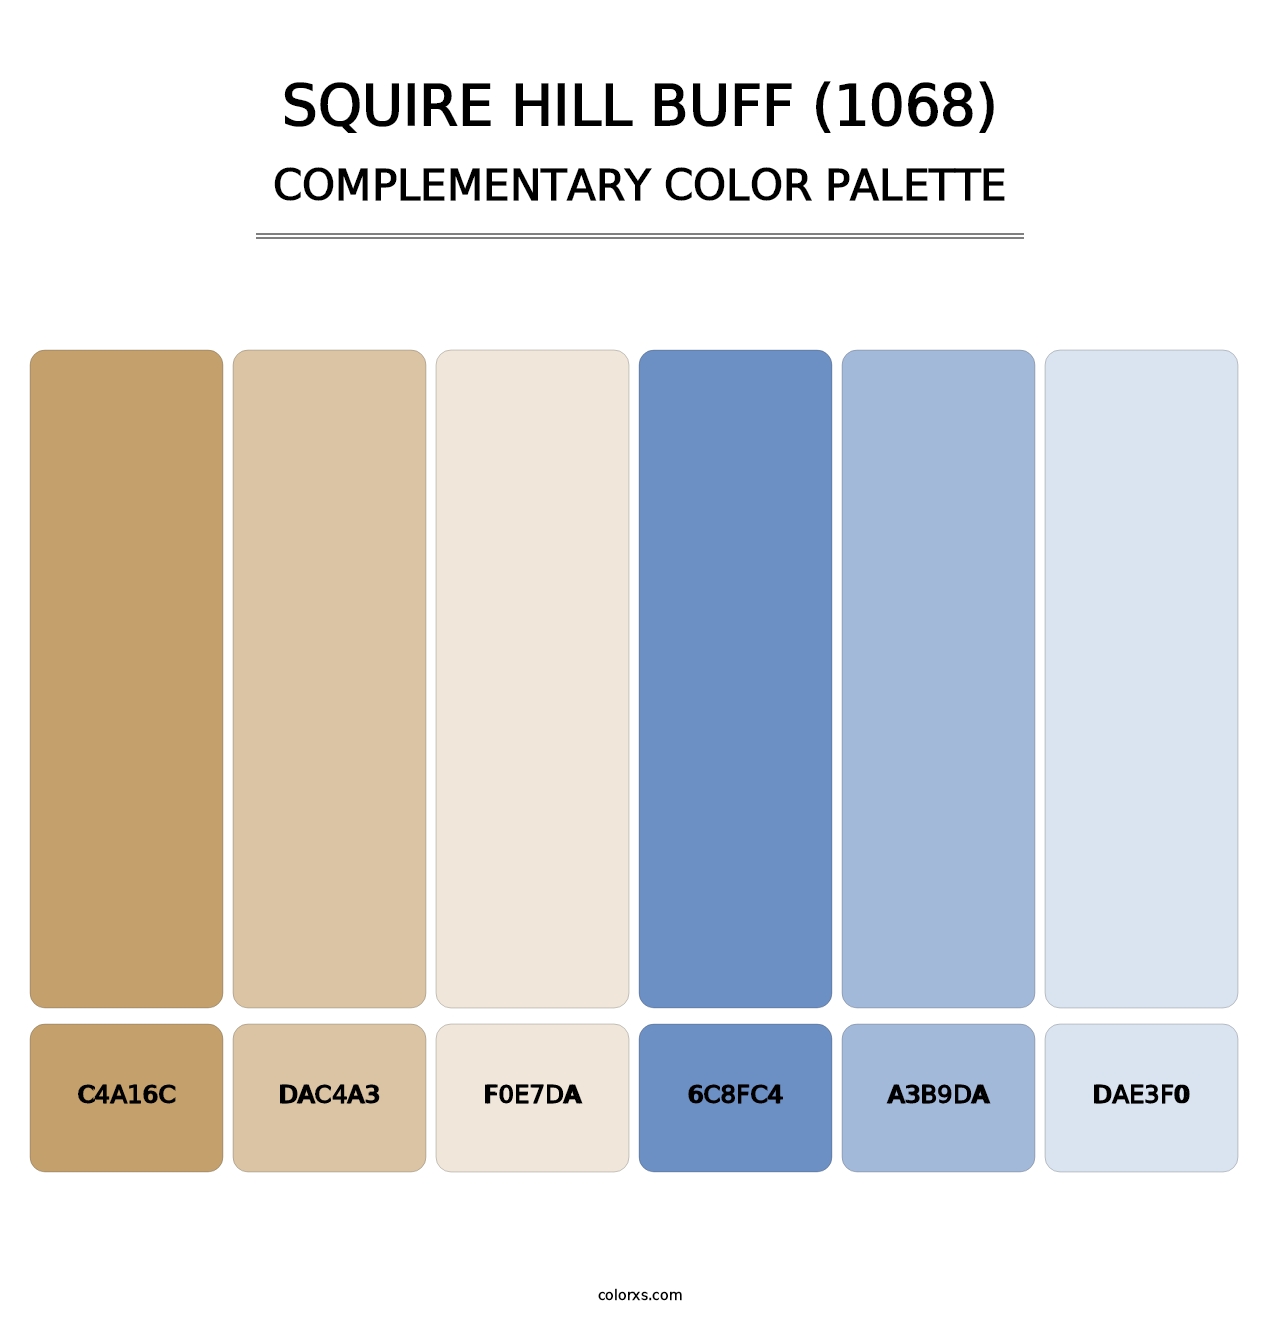 Squire Hill Buff (1068) - Complementary Color Palette